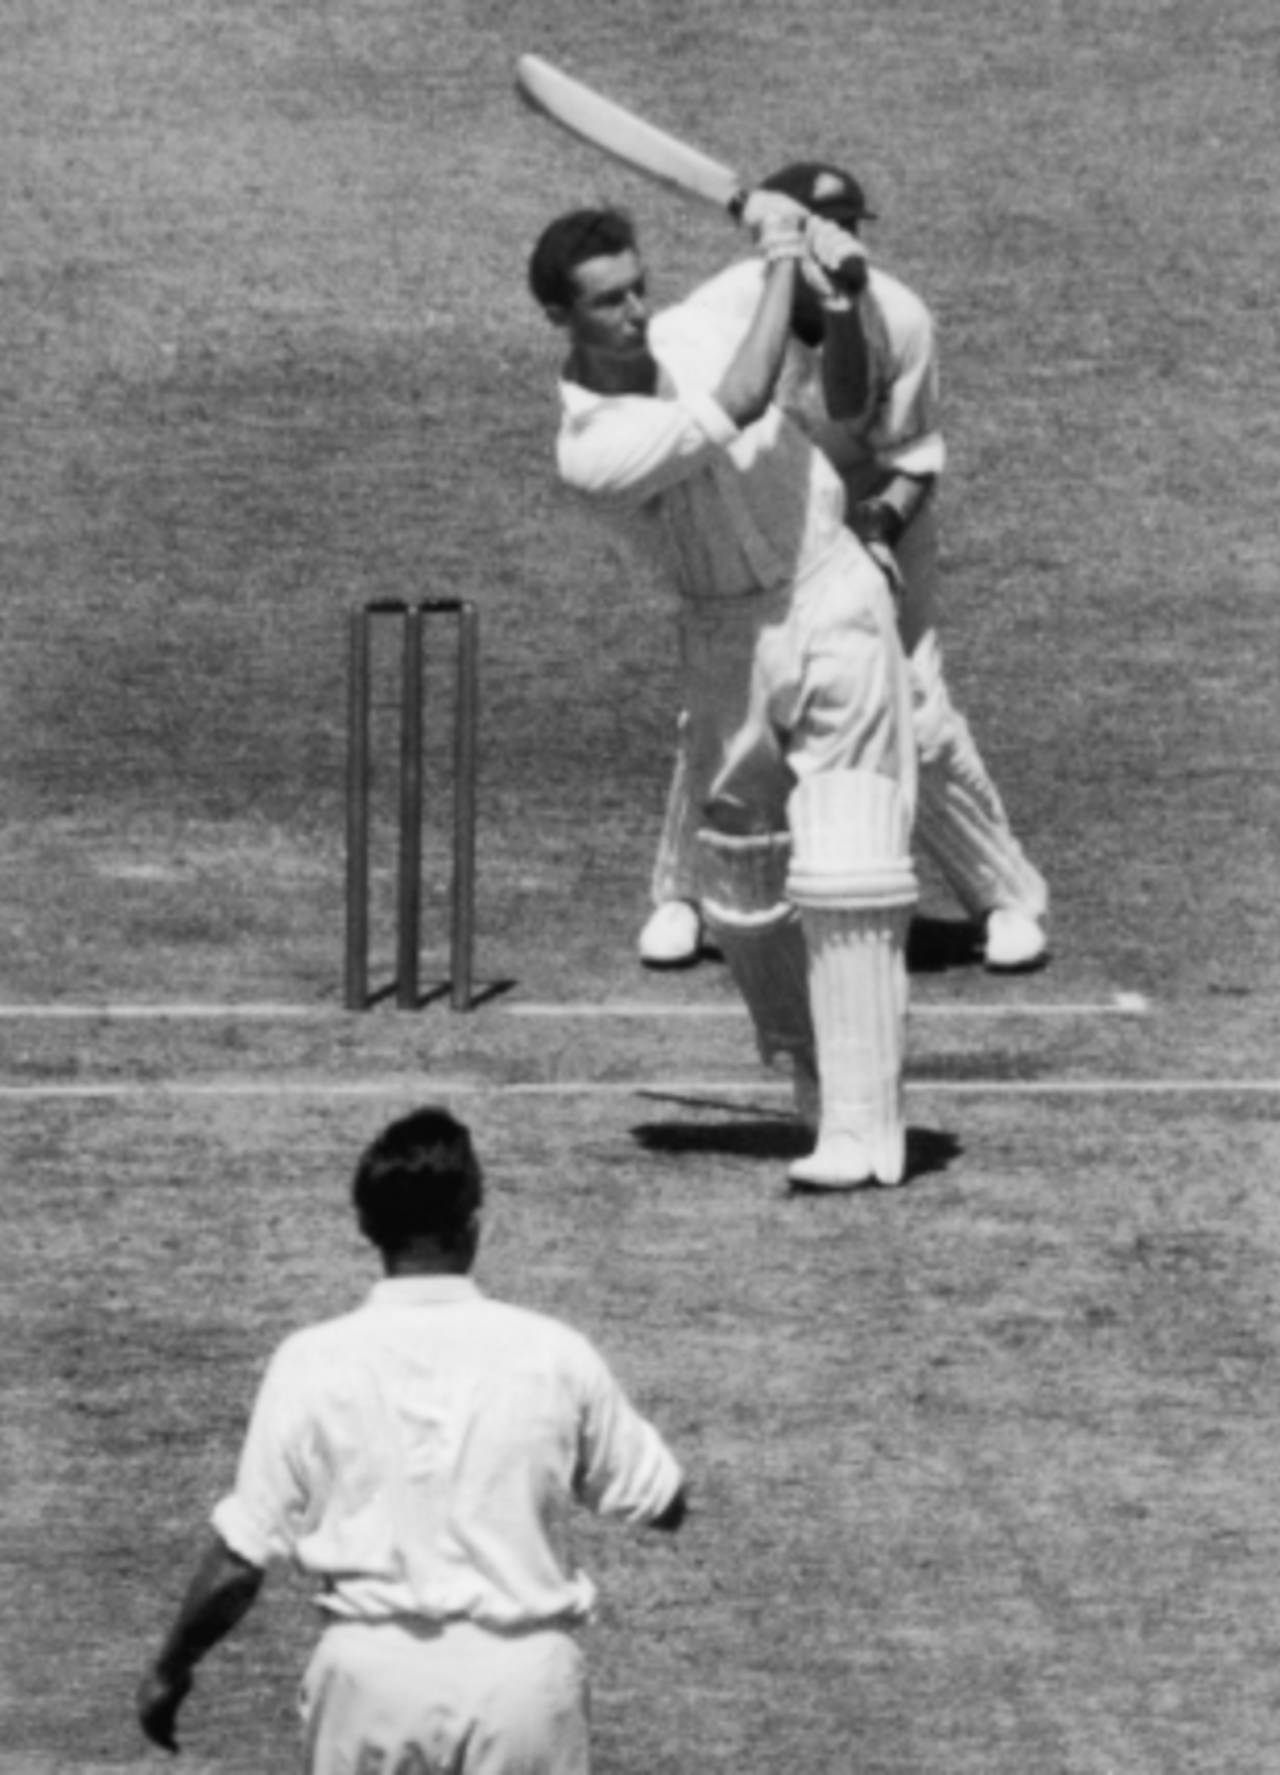 Reg Simpson batting during his innings of 156 not out at the MCG, Australia v England, 5th Test, Melbourne, February 27, 1951